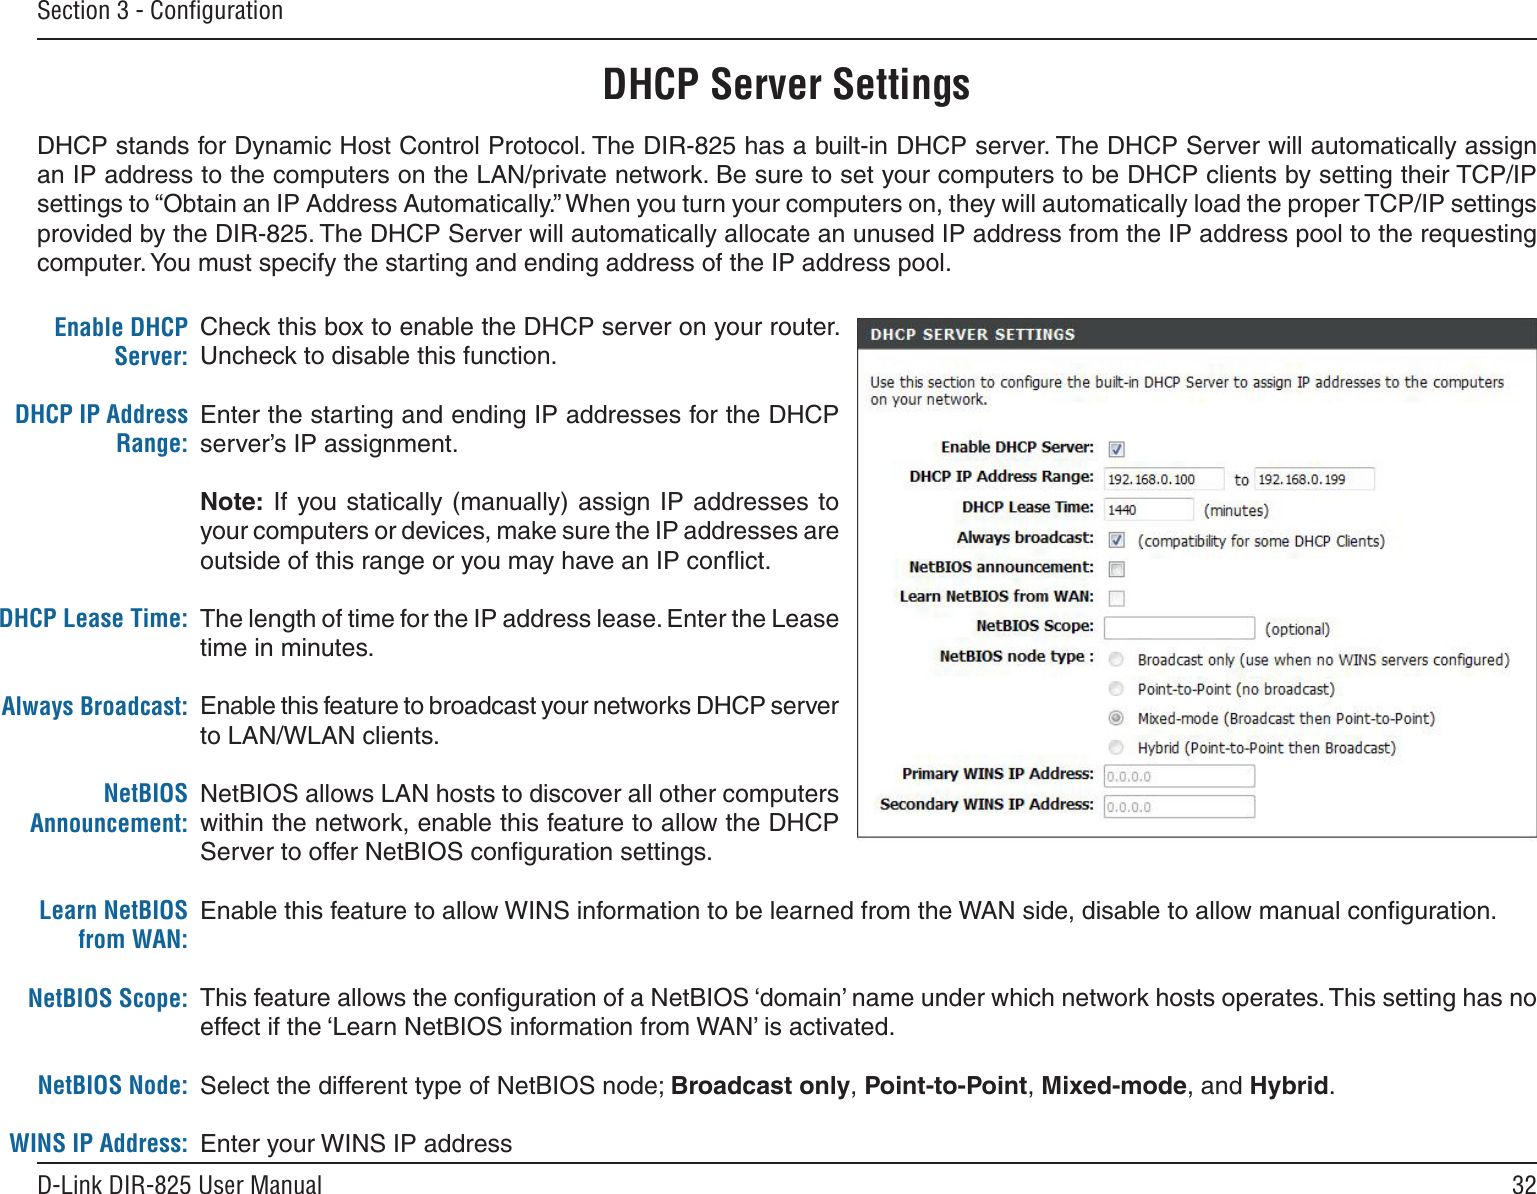 32D-Link DIR-825 User ManualSection 3 - ConﬁgurationDHCP Server SettingsDHCP stands for Dynamic Host Control Protocol. The DIR-825 has a built-in DHCP server. The DHCP Server will automatically assign an IP address to the computers on the LAN/private network. Be sure to set your computers to be DHCP clients by setting their TCP/IP settings to “Obtain an IP Address Automatically.” When you turn your computers on, they will automatically load the proper TCP/IP settings provided by the DIR-825. The DHCP Server will automatically allocate an unused IP address from the IP address pool to the requesting computer. You must specify the starting and ending address of the IP address pool.Check this box to enable the DHCP server on your router. Uncheck to disable this function.Enter the starting and ending IP addresses for the DHCP server’s IP assignment.Note: If you statically (manually) assign  IP addresses  to your computers or devices, make sure the IP addresses are outside of this range or you may have an IP conﬂict. The length of time for the IP address lease. Enter the Lease time in minutes.Enable this feature to broadcast your networks DHCP server to LAN/WLAN clients.NetBIOS allows LAN hosts to discover all other computers within the network, enable this feature to allow the DHCP Server to offer NetBIOS conﬁguration settings.Enable this feature to allow WINS information to be learned from the WAN side, disable to allow manual conﬁguration.This feature allows the conﬁguration of a NetBIOS ‘domain’ name under which network hosts operates. This setting has no effect if the ‘Learn NetBIOS information from WAN’ is activated.Select the different type of NetBIOS node; Broadcast only, Point-to-Point, Mixed-mode, and Hybrid.Enter your WINS IP addressEnable DHCP Server:DHCP IP Address Range:DHCP Lease Time:Always Broadcast:NetBIOS Announcement:Learn NetBIOS from WAN:NetBIOS Scope:NetBIOS Node:WINS IP Address: